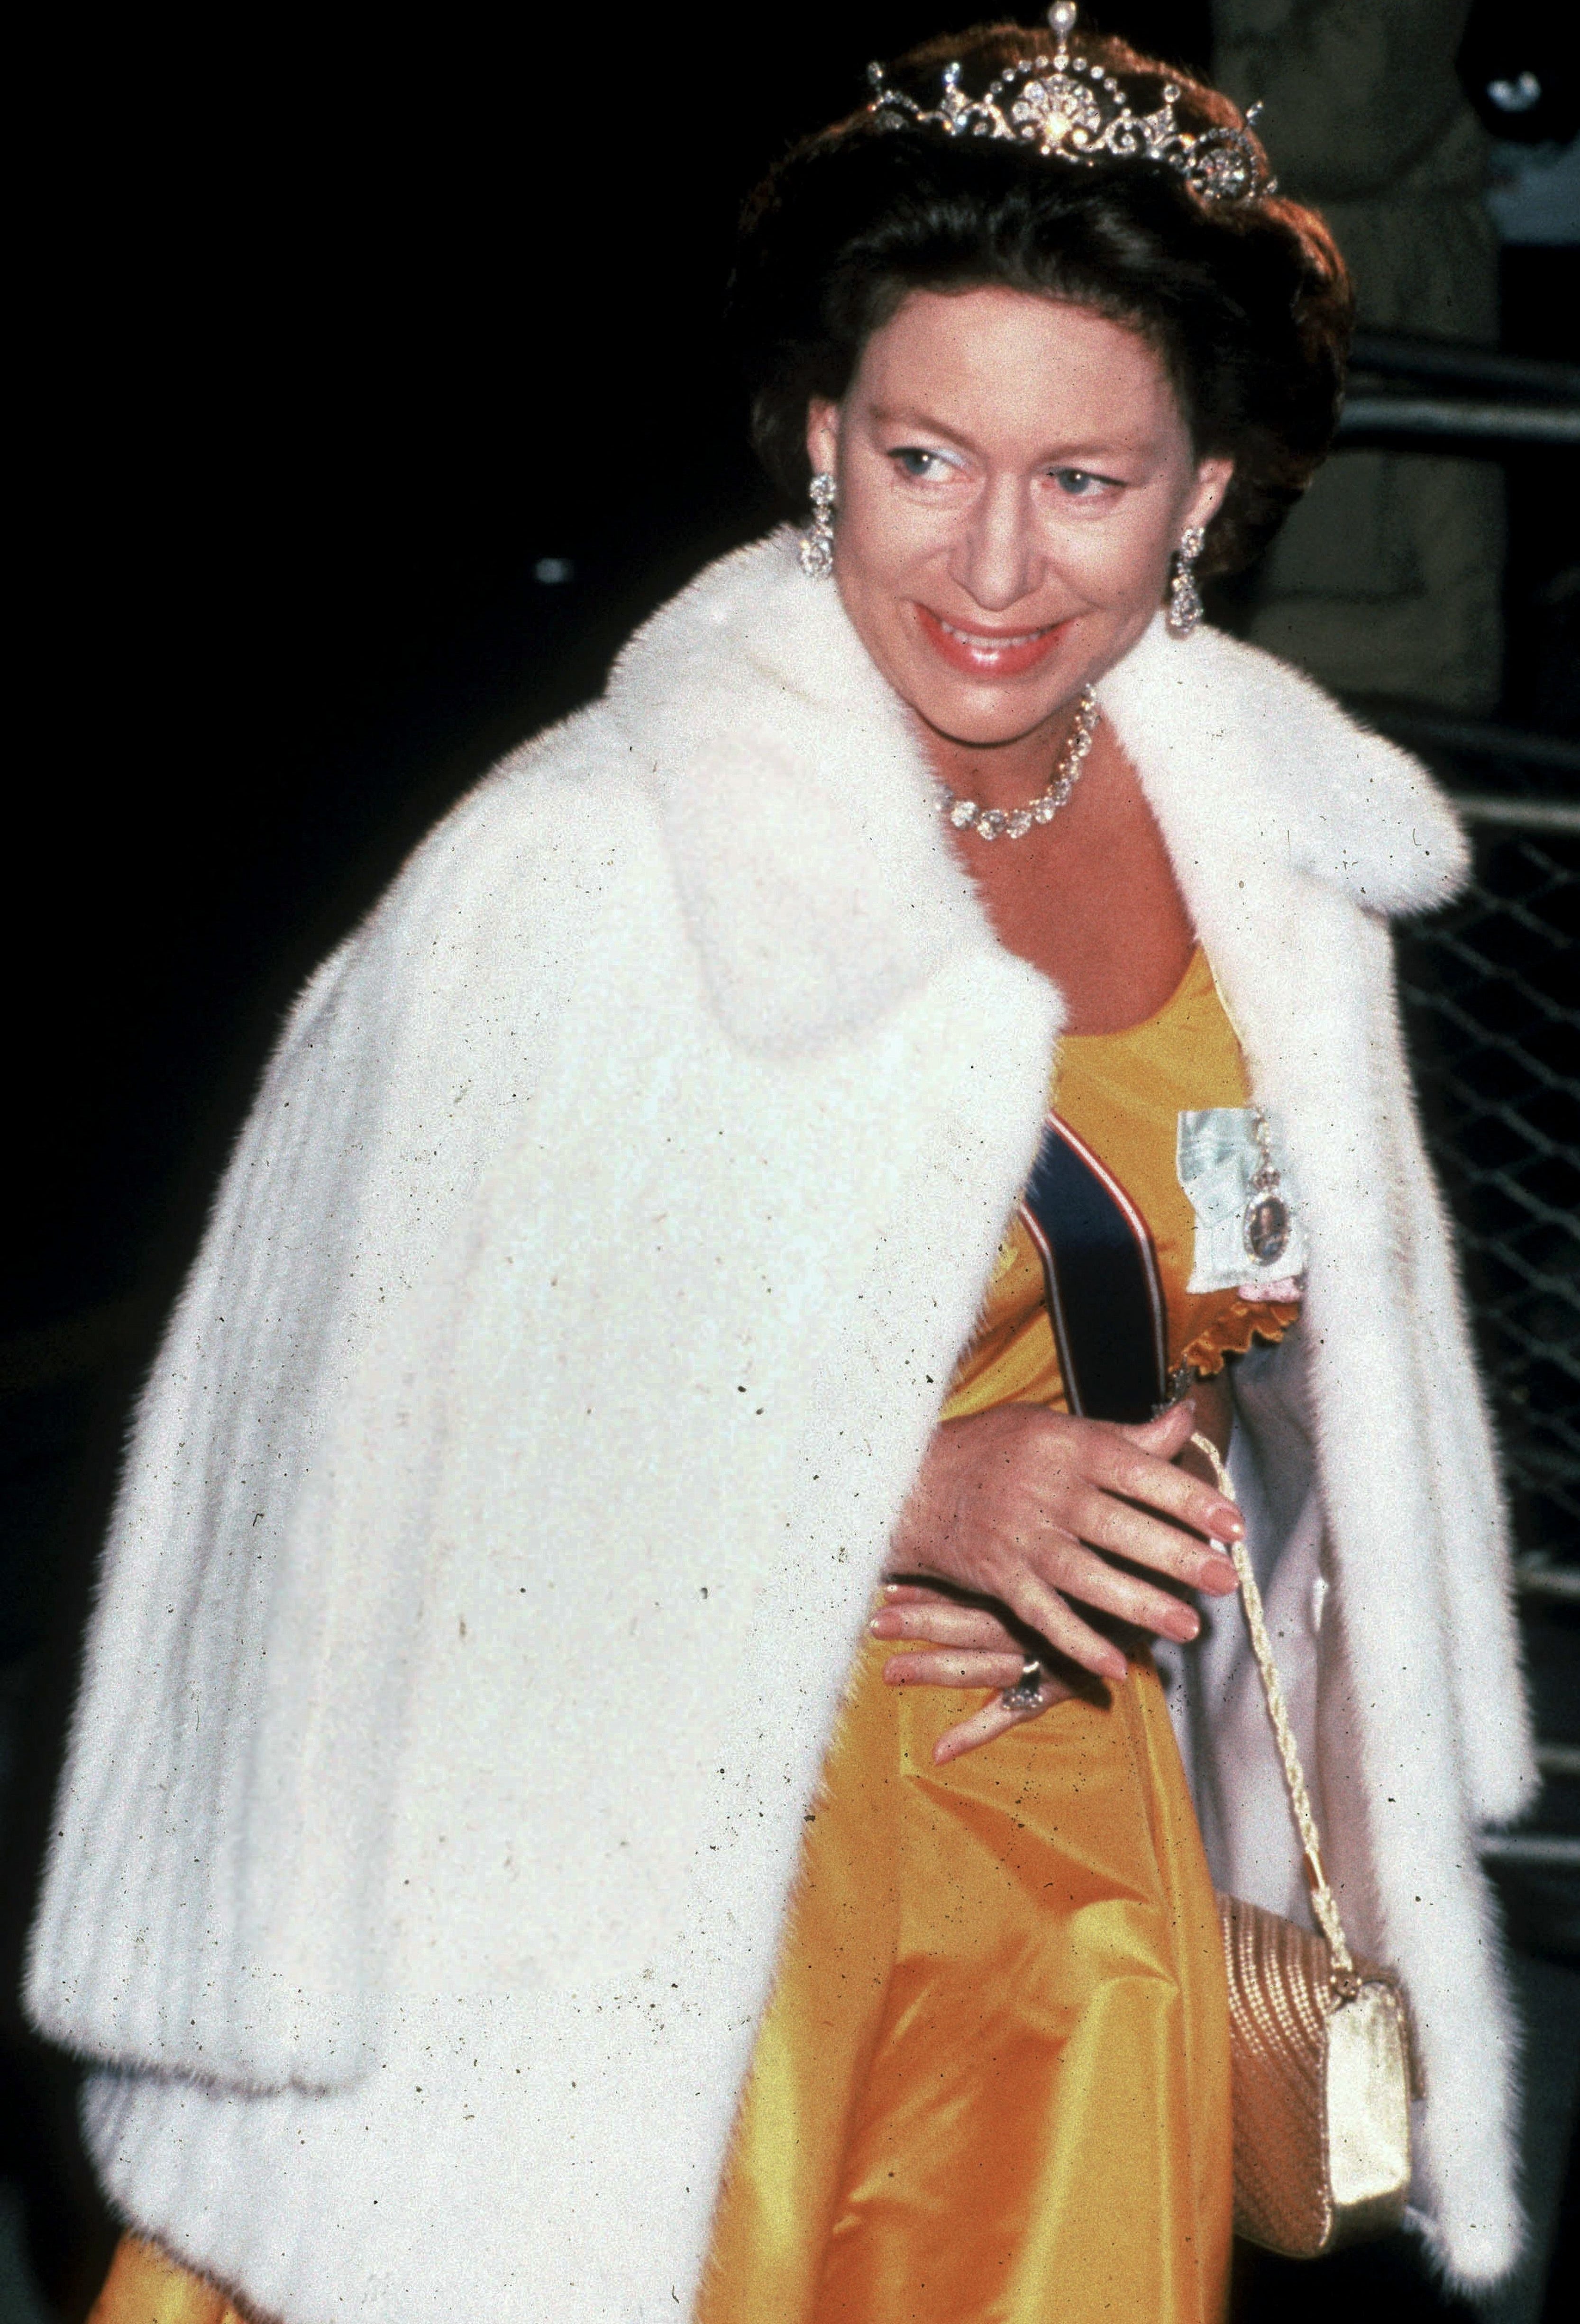 Close-up of Margaret smiling and wearing a crown and a fur jacket